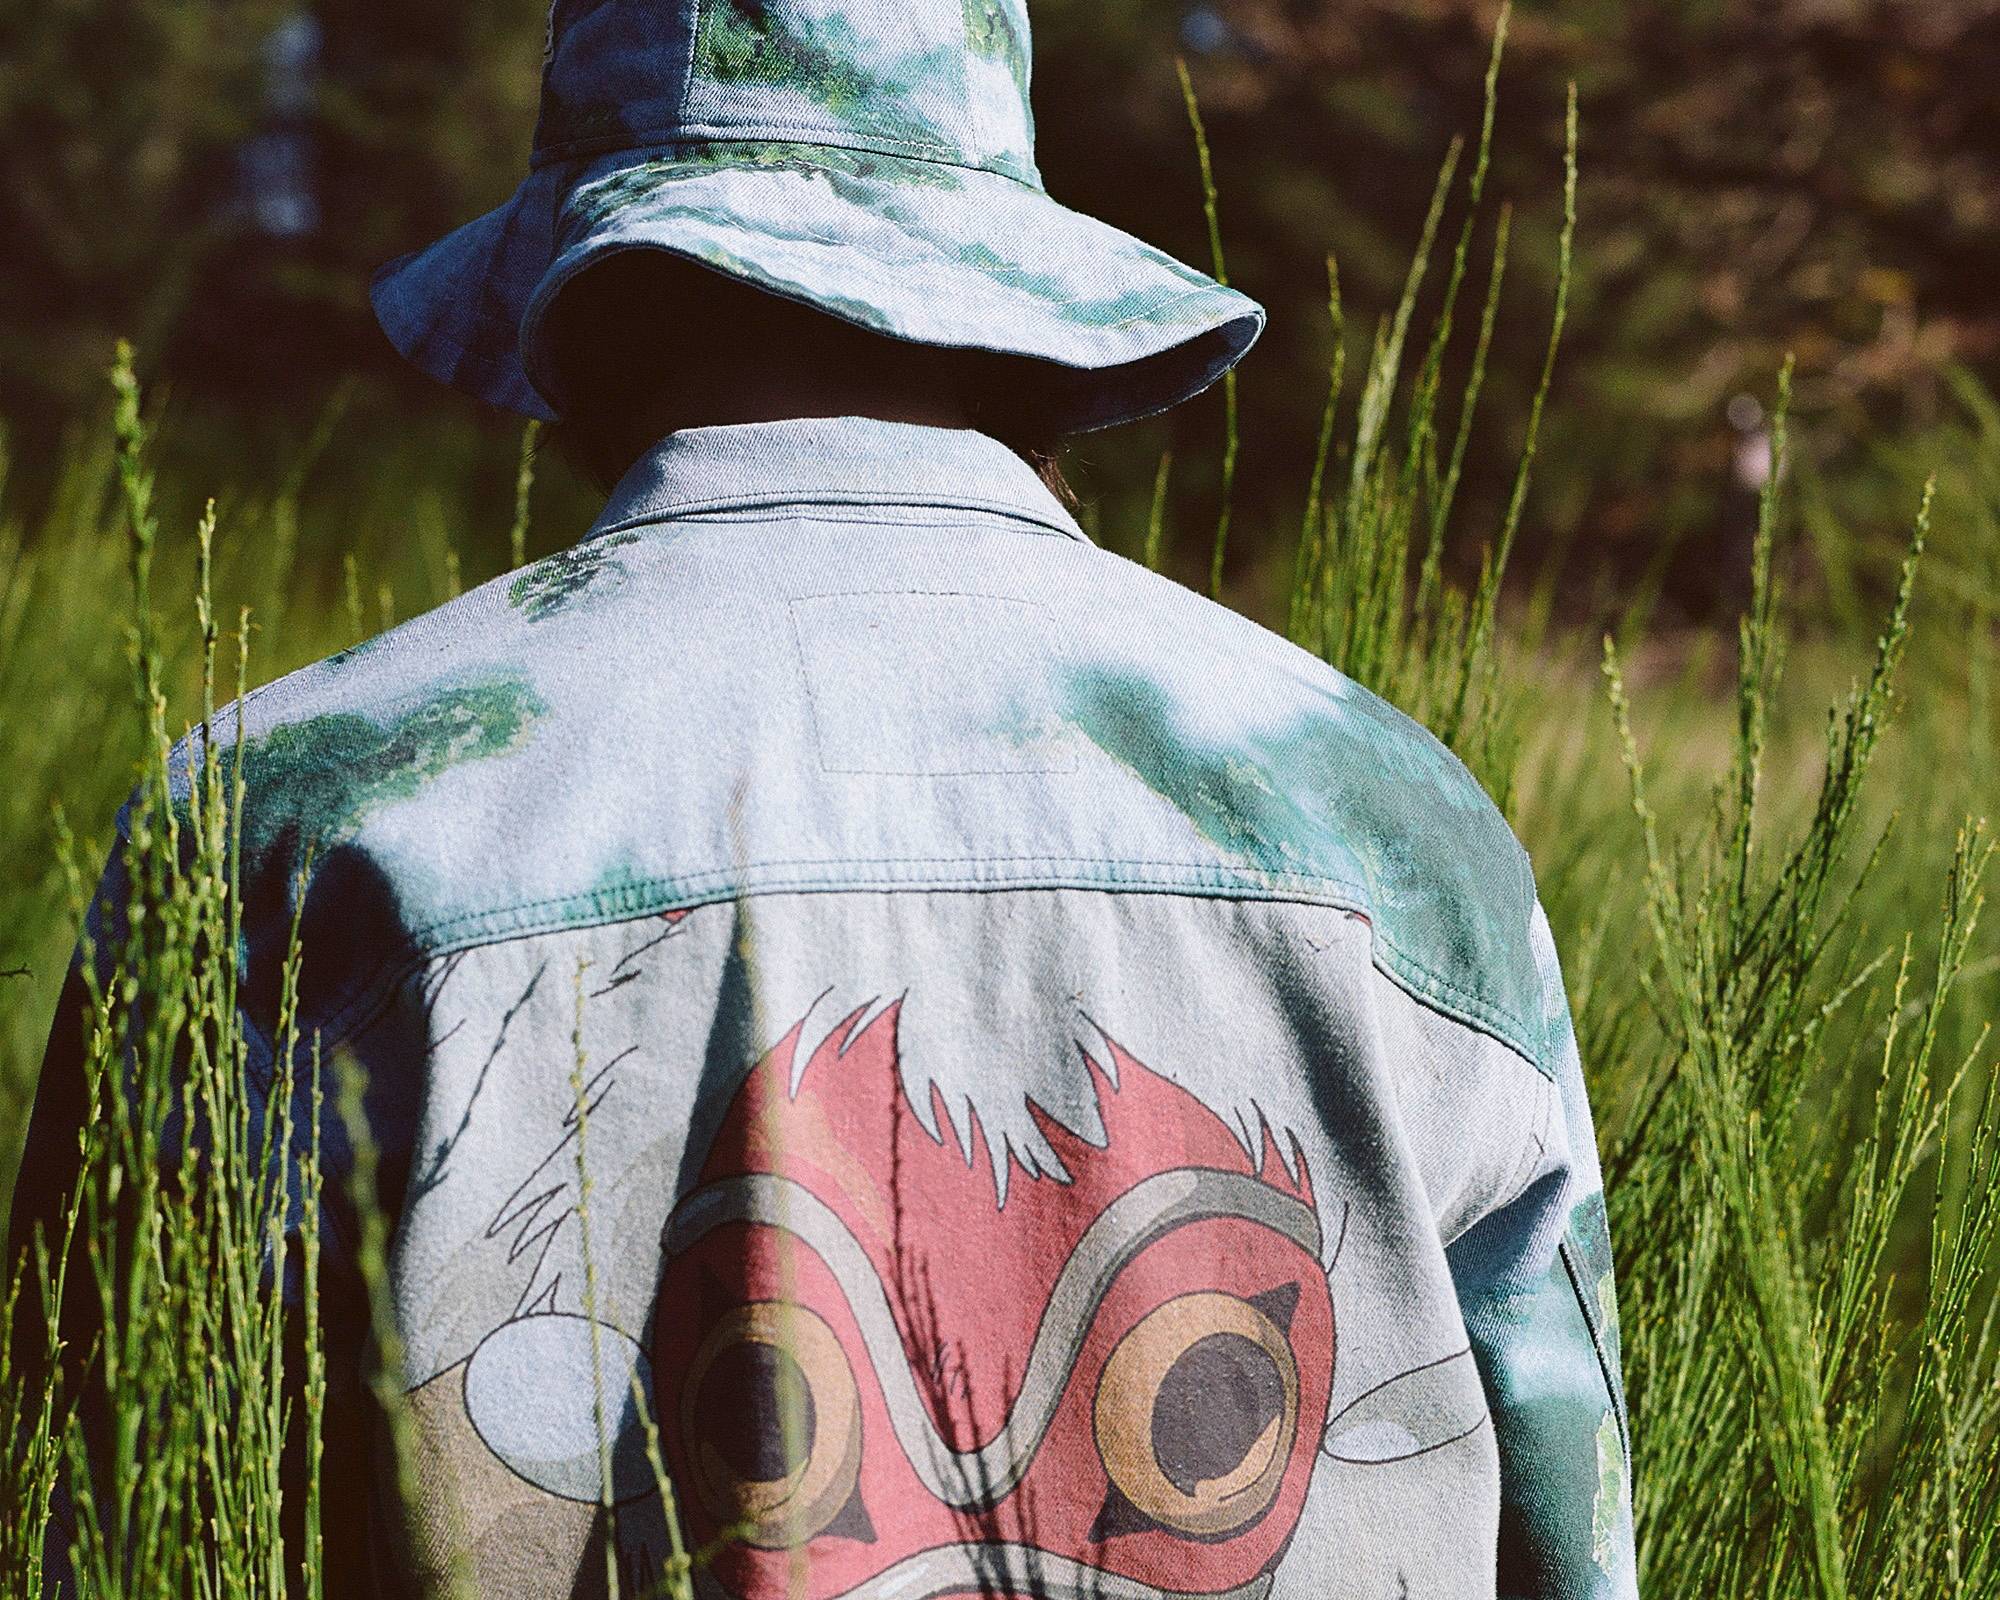 Image of person wearing Levi's® x Princess Mononoke collection piece and posing in forest setting